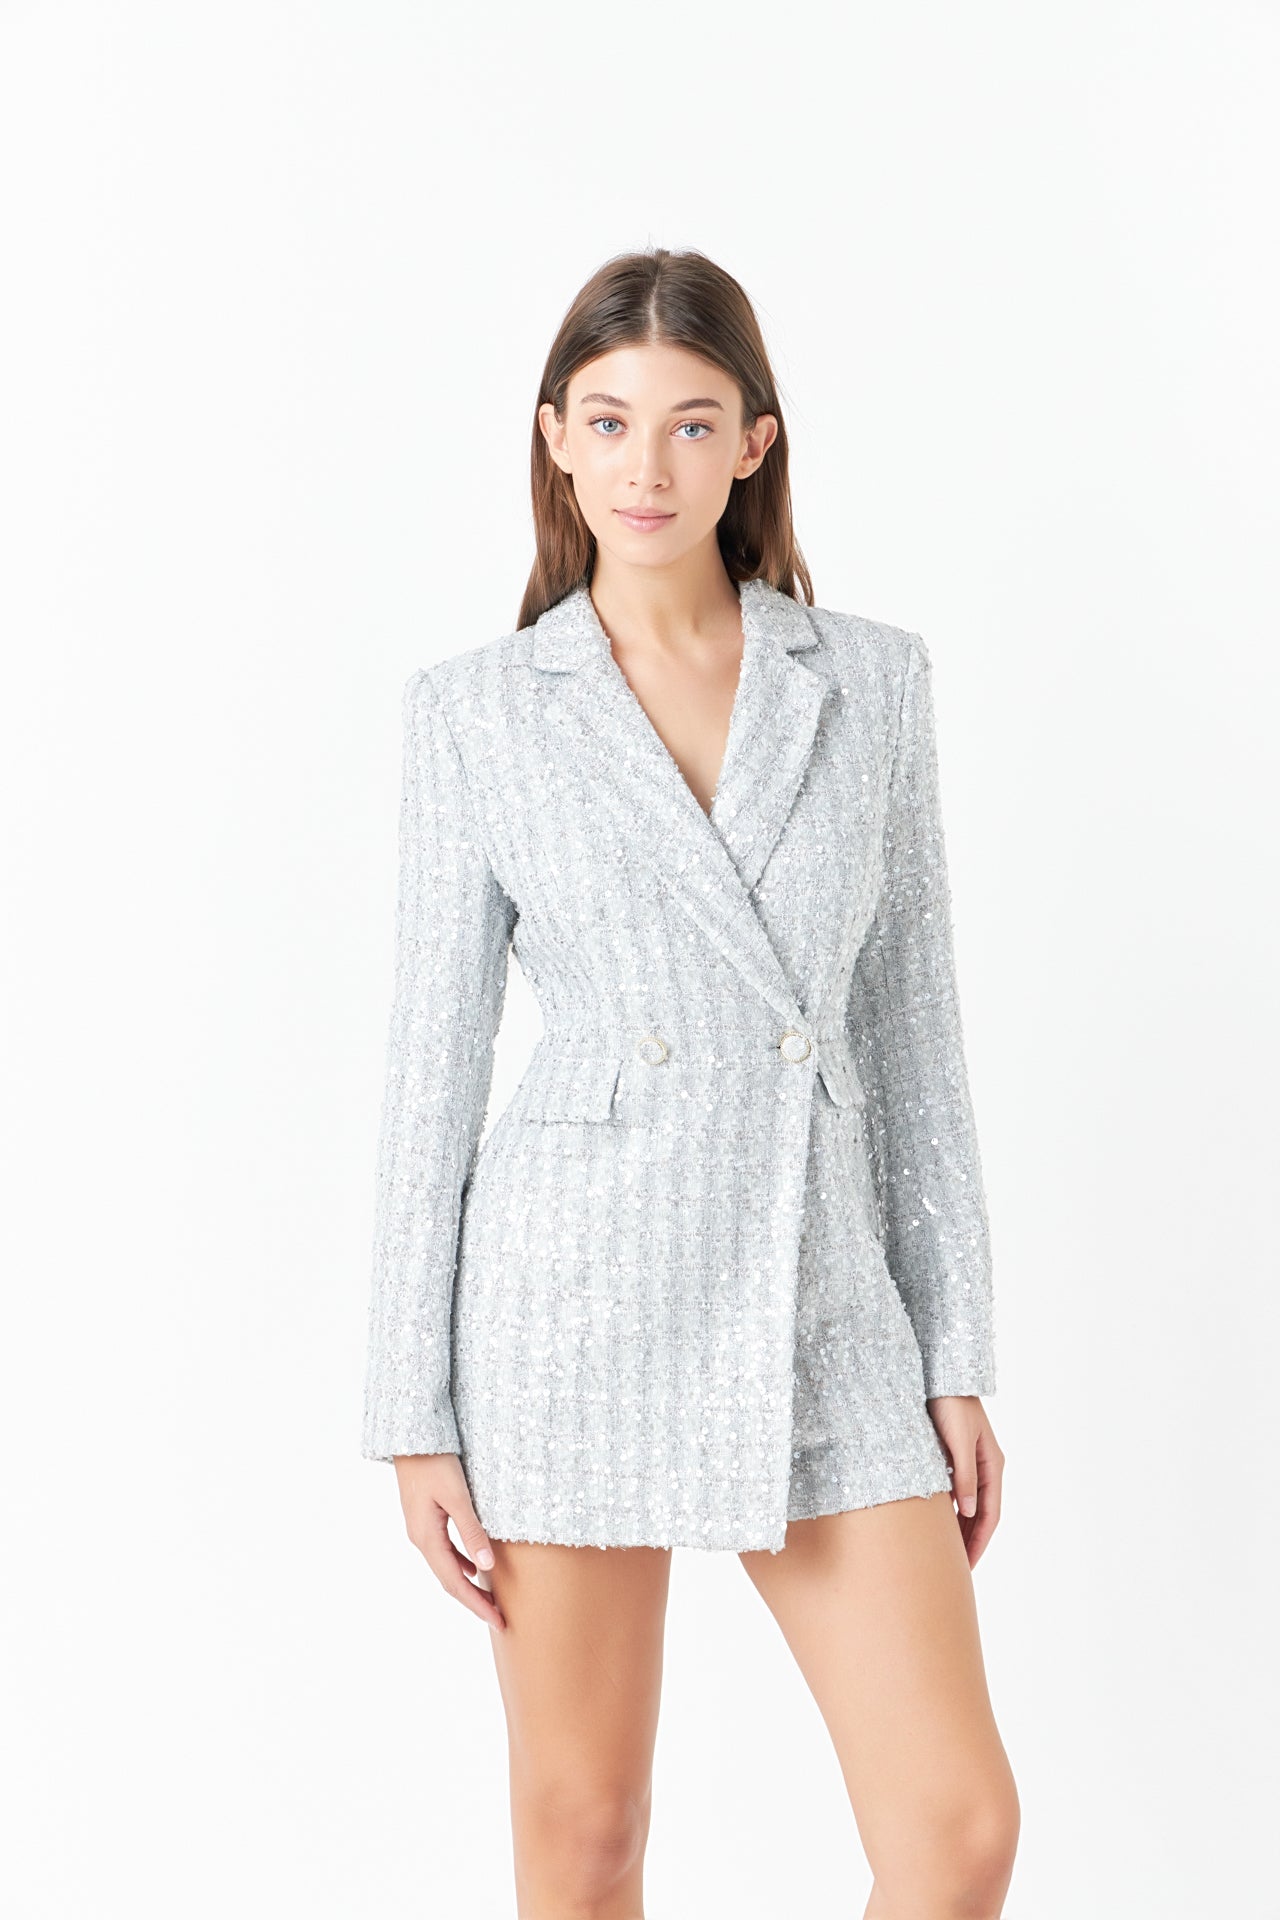 ENDLESS ROSE - Premium Sequins Tweed Romper - ROMPERS available at Objectrare